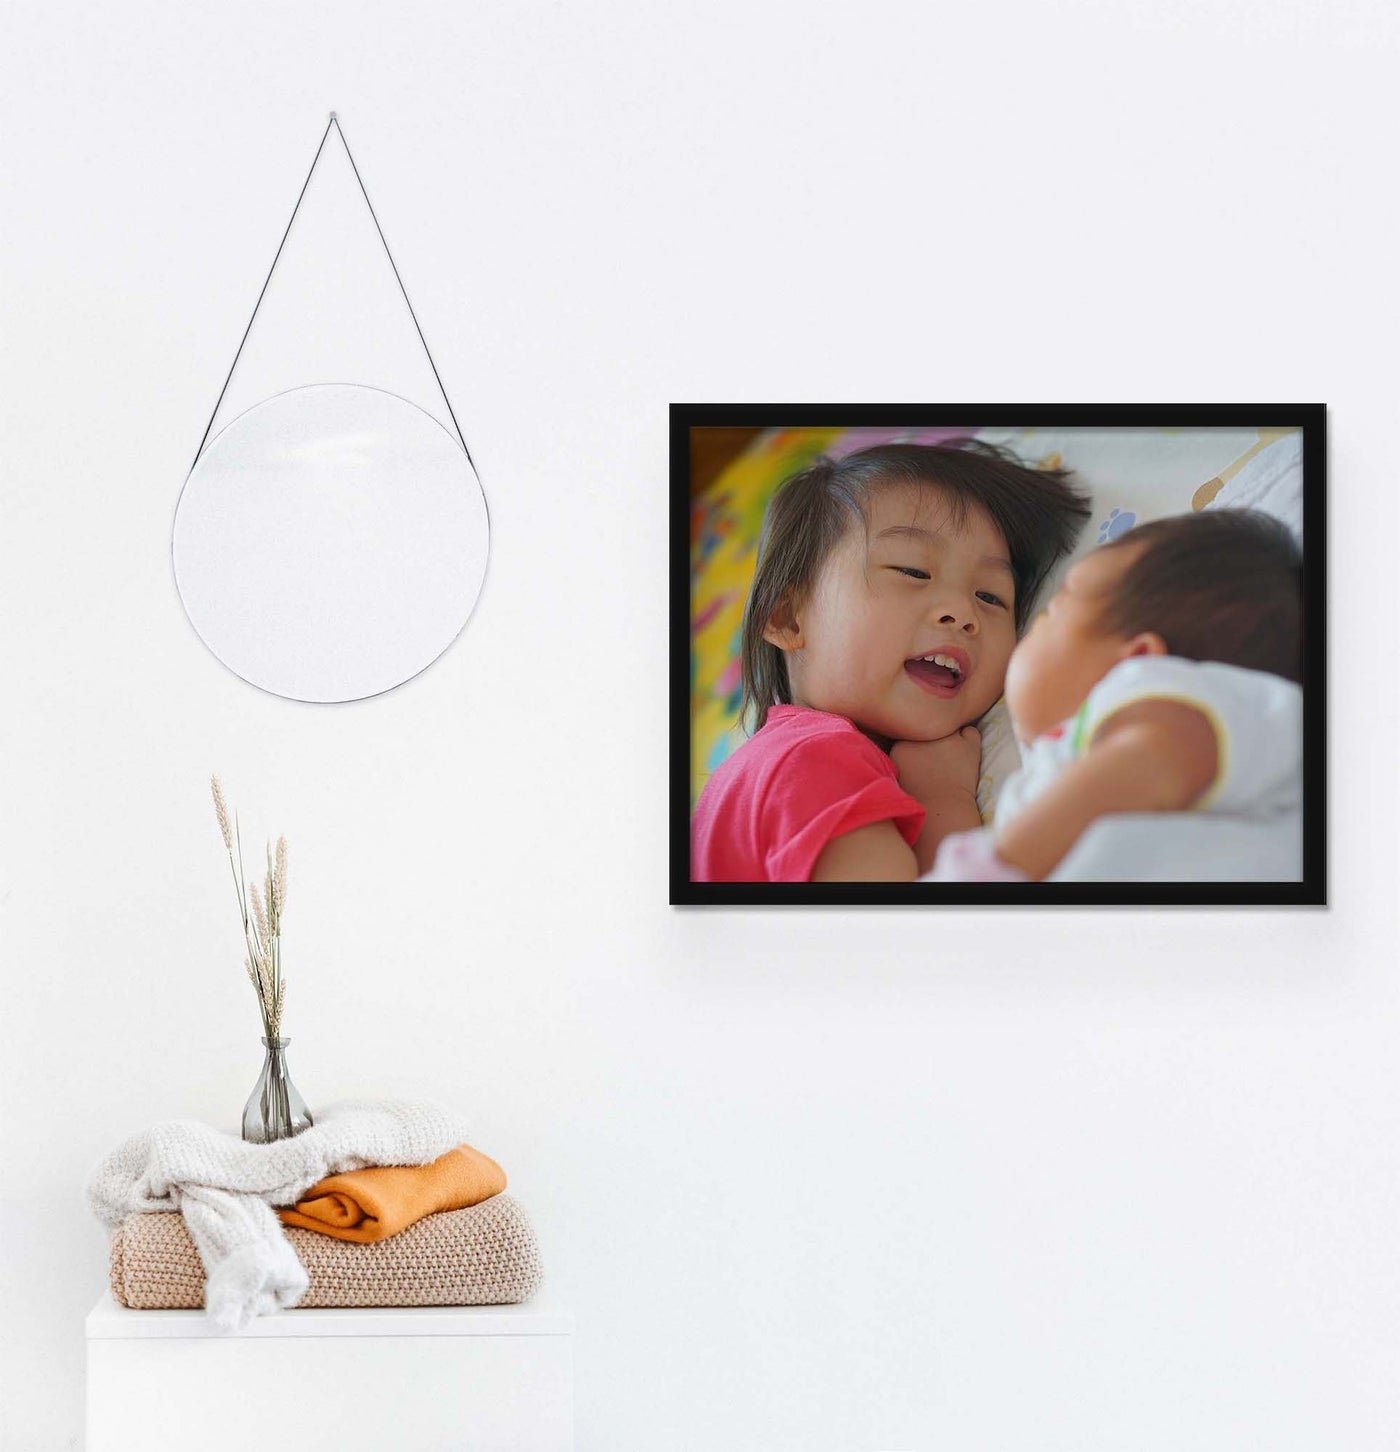 Playing With Newborn Sibling (Framed Prints)